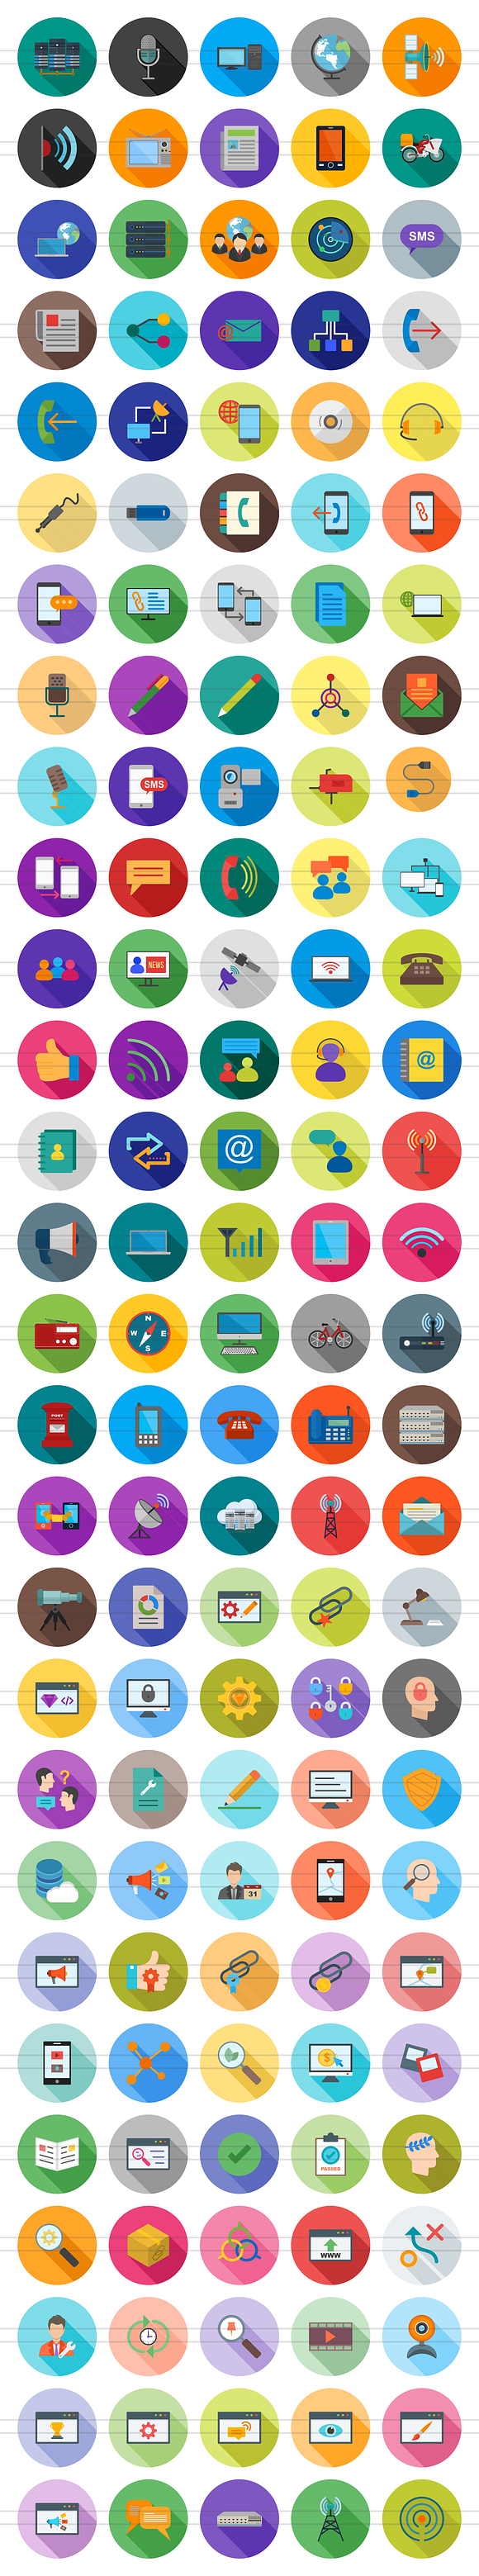 140 IT & Communication Flat Icons in Graphics - product preview 1